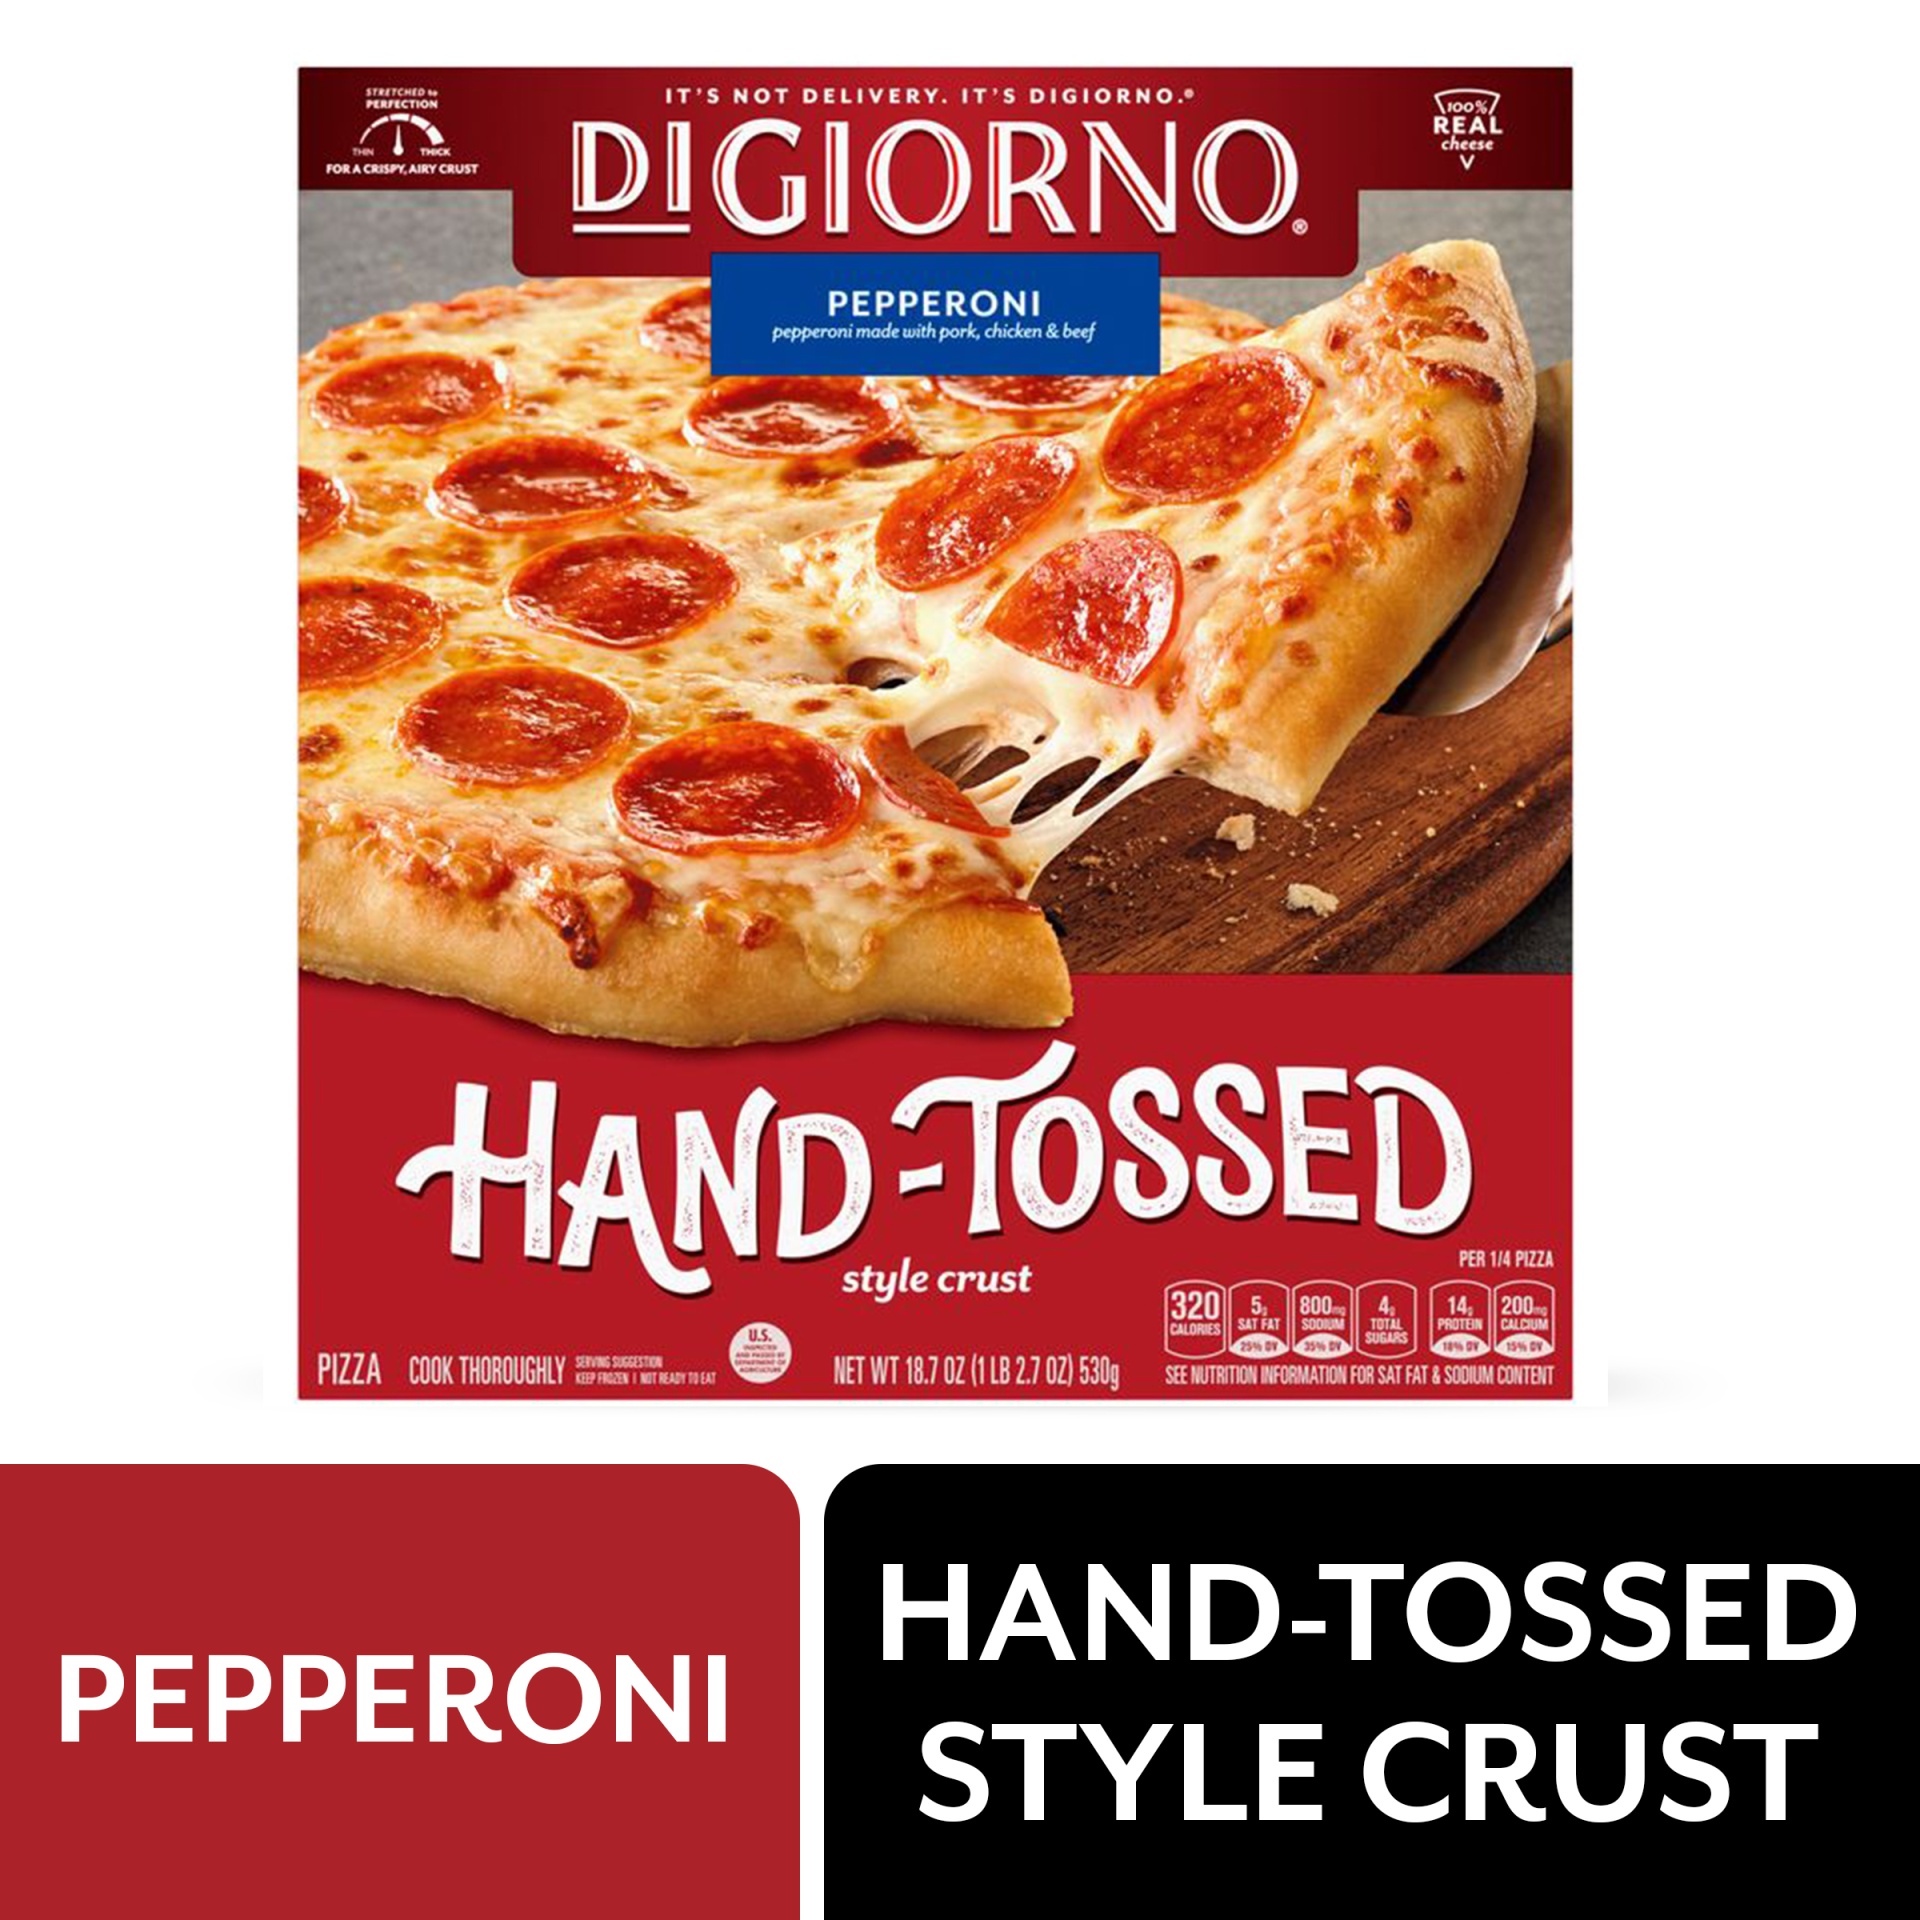 slide 1 of 6, DIGIORNO Pepperoni Frozen Pizza with Hand-Tossed Style Crust, 18.7 oz